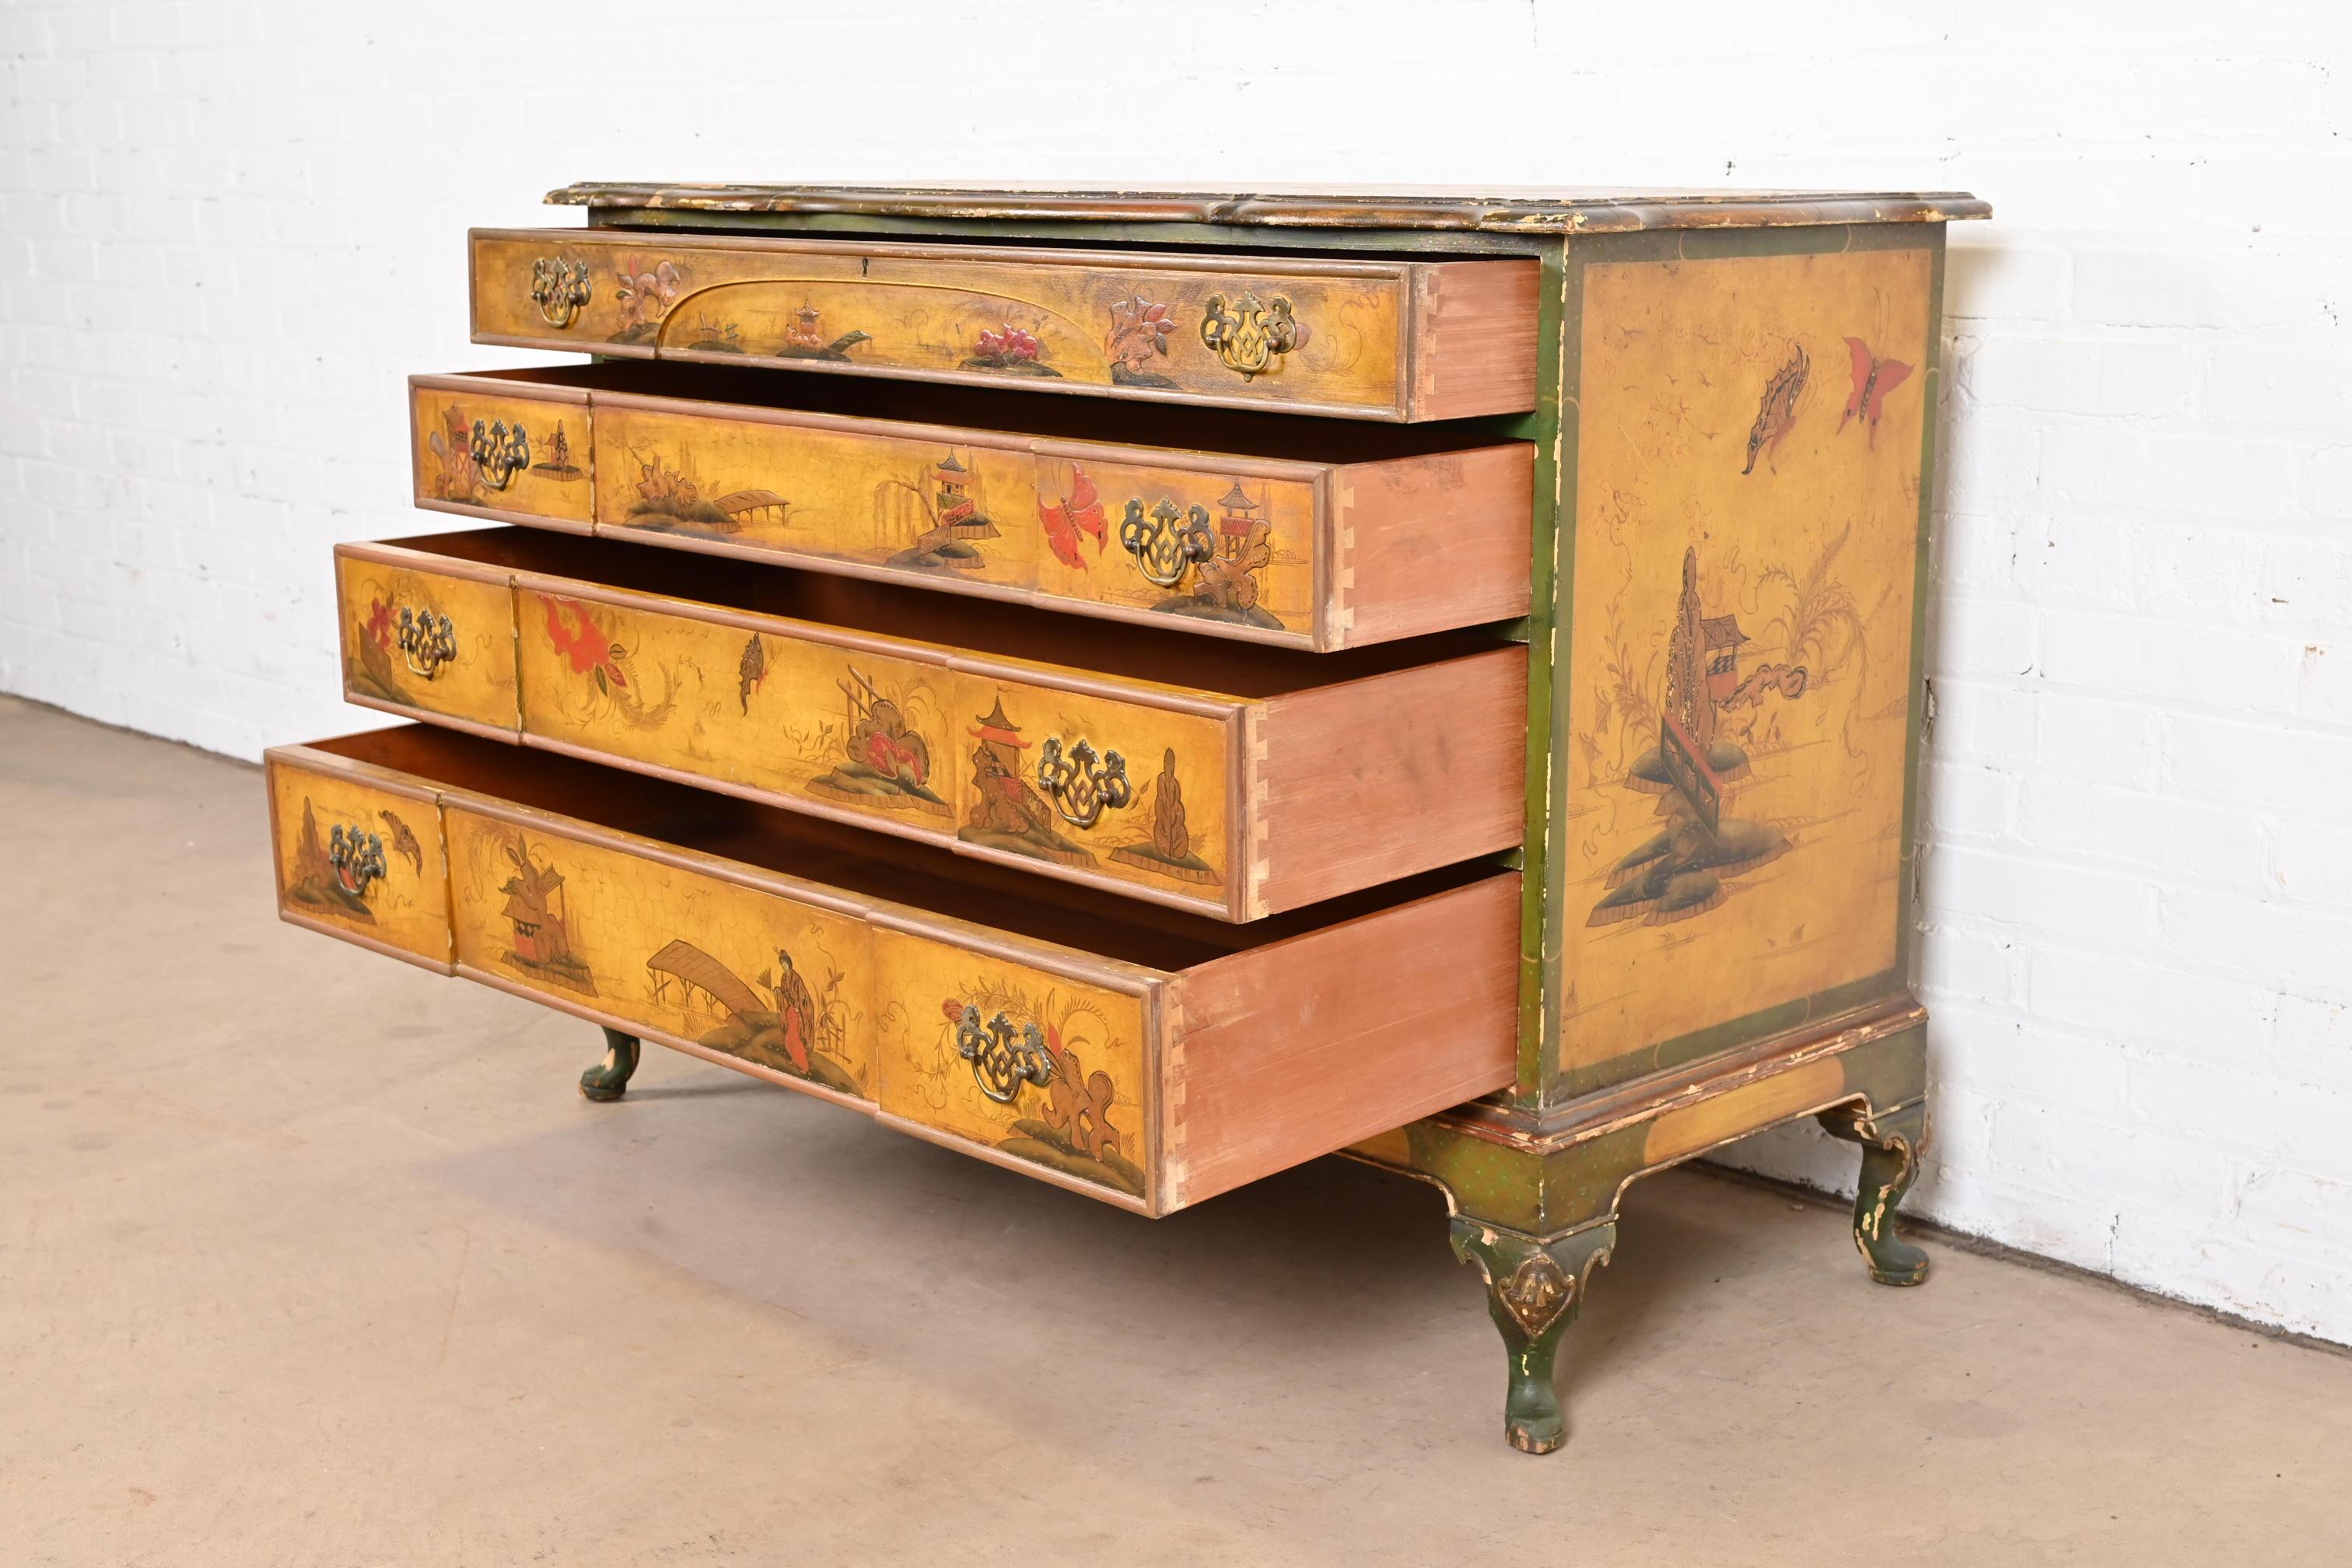 Antique Japanned Chinoiserie Queen Anne Bureau From Historic Edgecroft Mansion For Sale 2